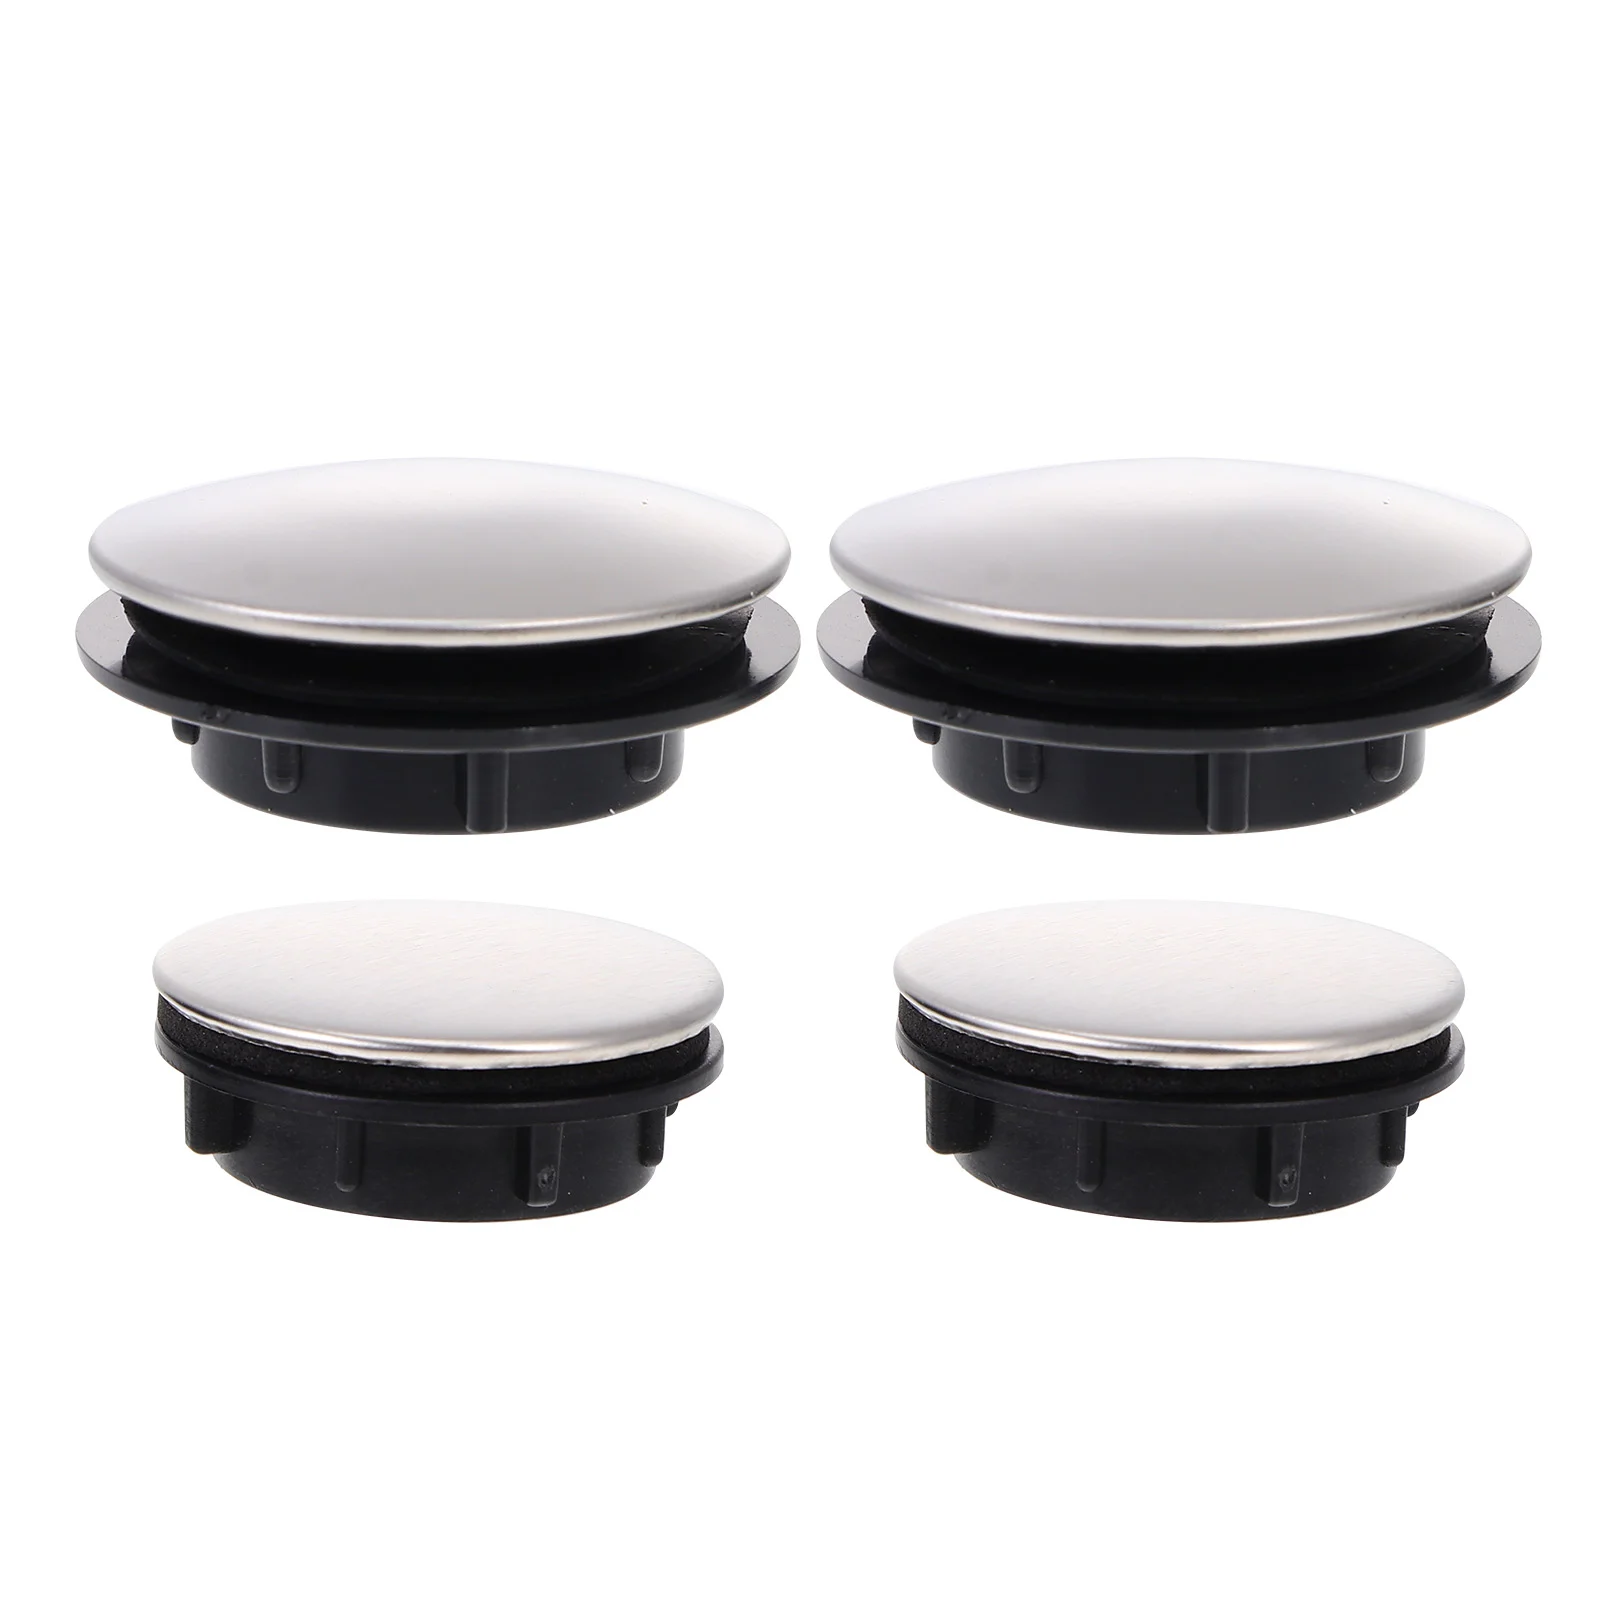 

4 Pcs Sink Hole Cover Kitchen Lid Faucet Sealing Cap Soap Dispenser Reliable Plug Accessory Stainless Steel Pp